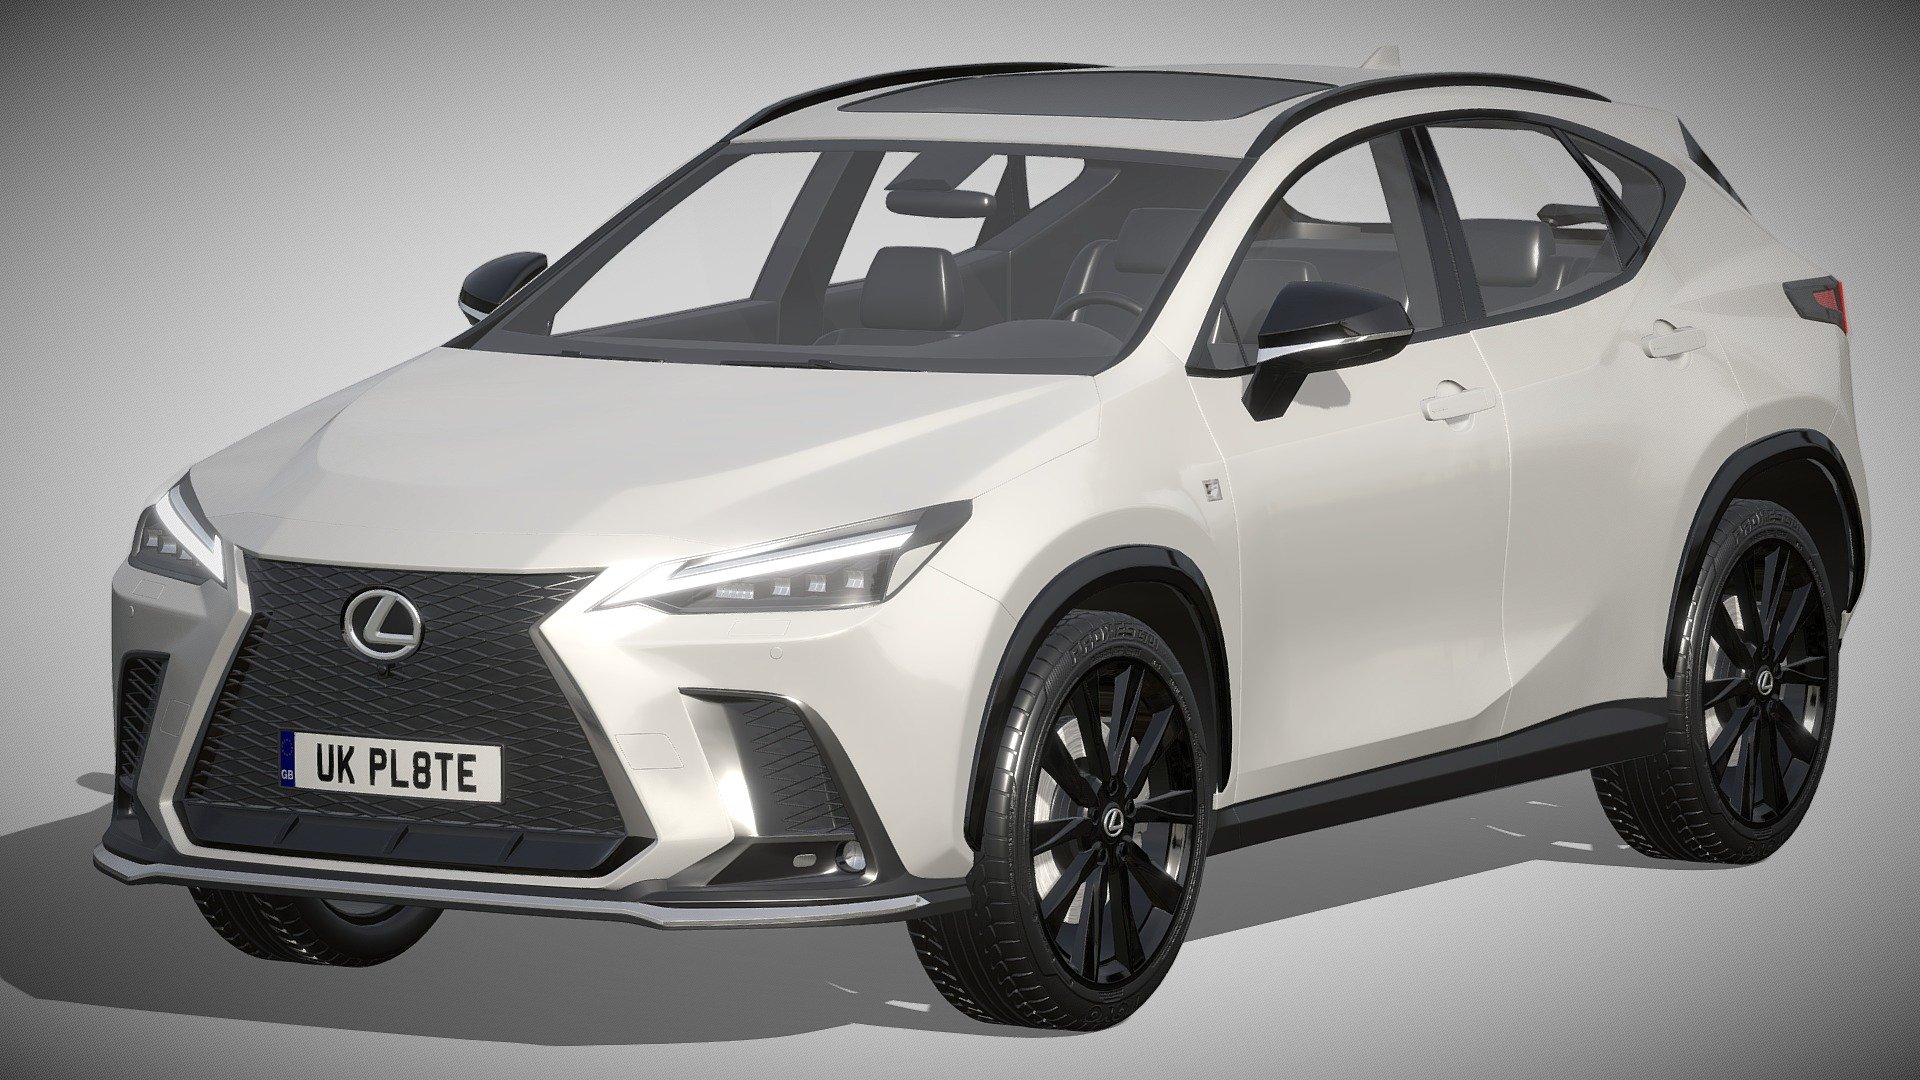 Lexus NX300 F-Sport 2022

https://www.lexus.com/models/NX

Clean geometry Light weight model, yet completely detailed for HI-Res renders. Use for movies, Advertisements or games

Corona render and materials

All textures include in *.rar files

Lighting setup is not included in the file! - Lexus NX300 F-Sport 2022 - Buy Royalty Free 3D model by zifir3d 3d model